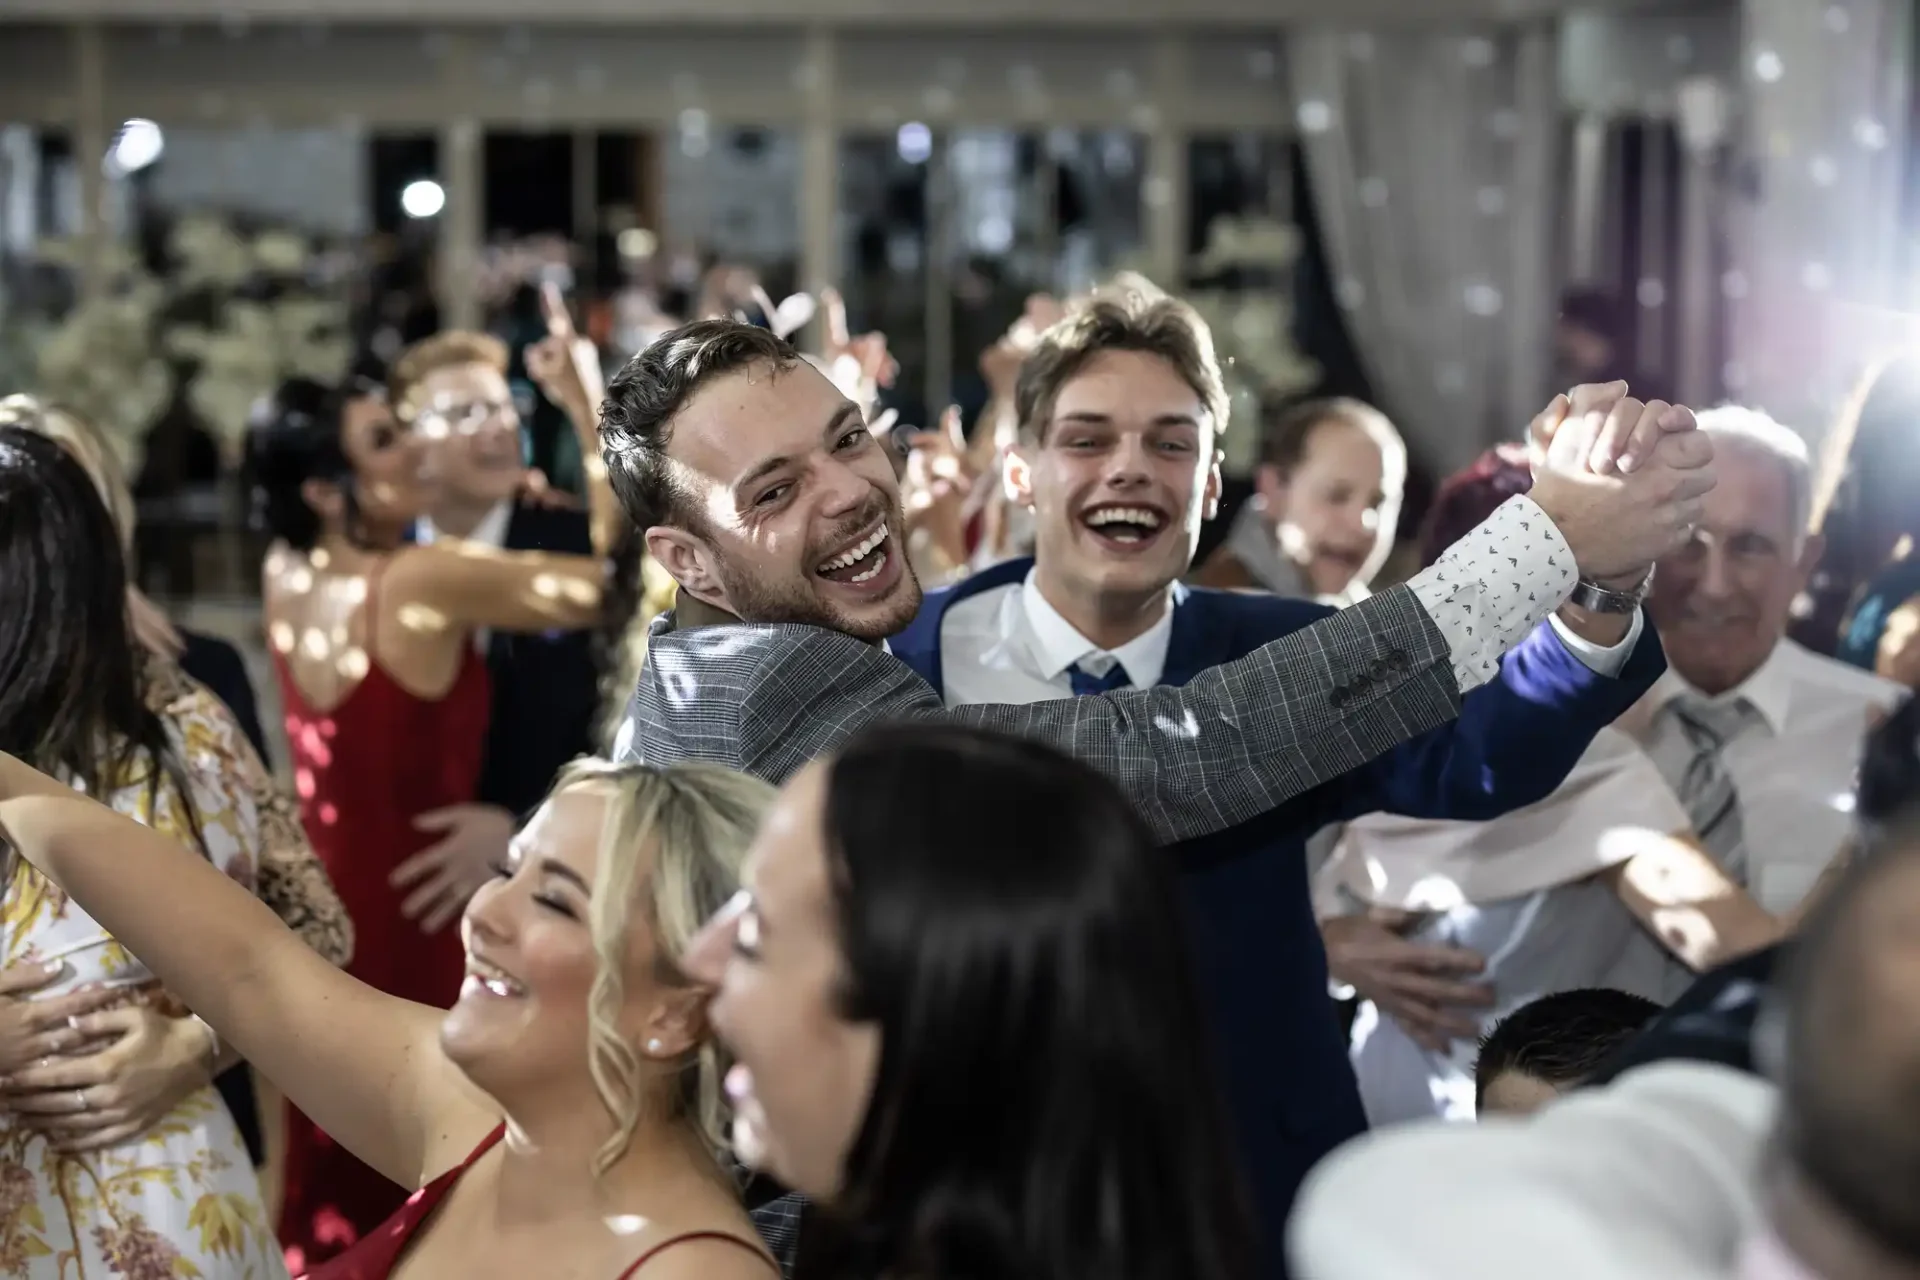 Two joyful young men dancing and taking a selfie at a festive gathering with other guests smiling around them.